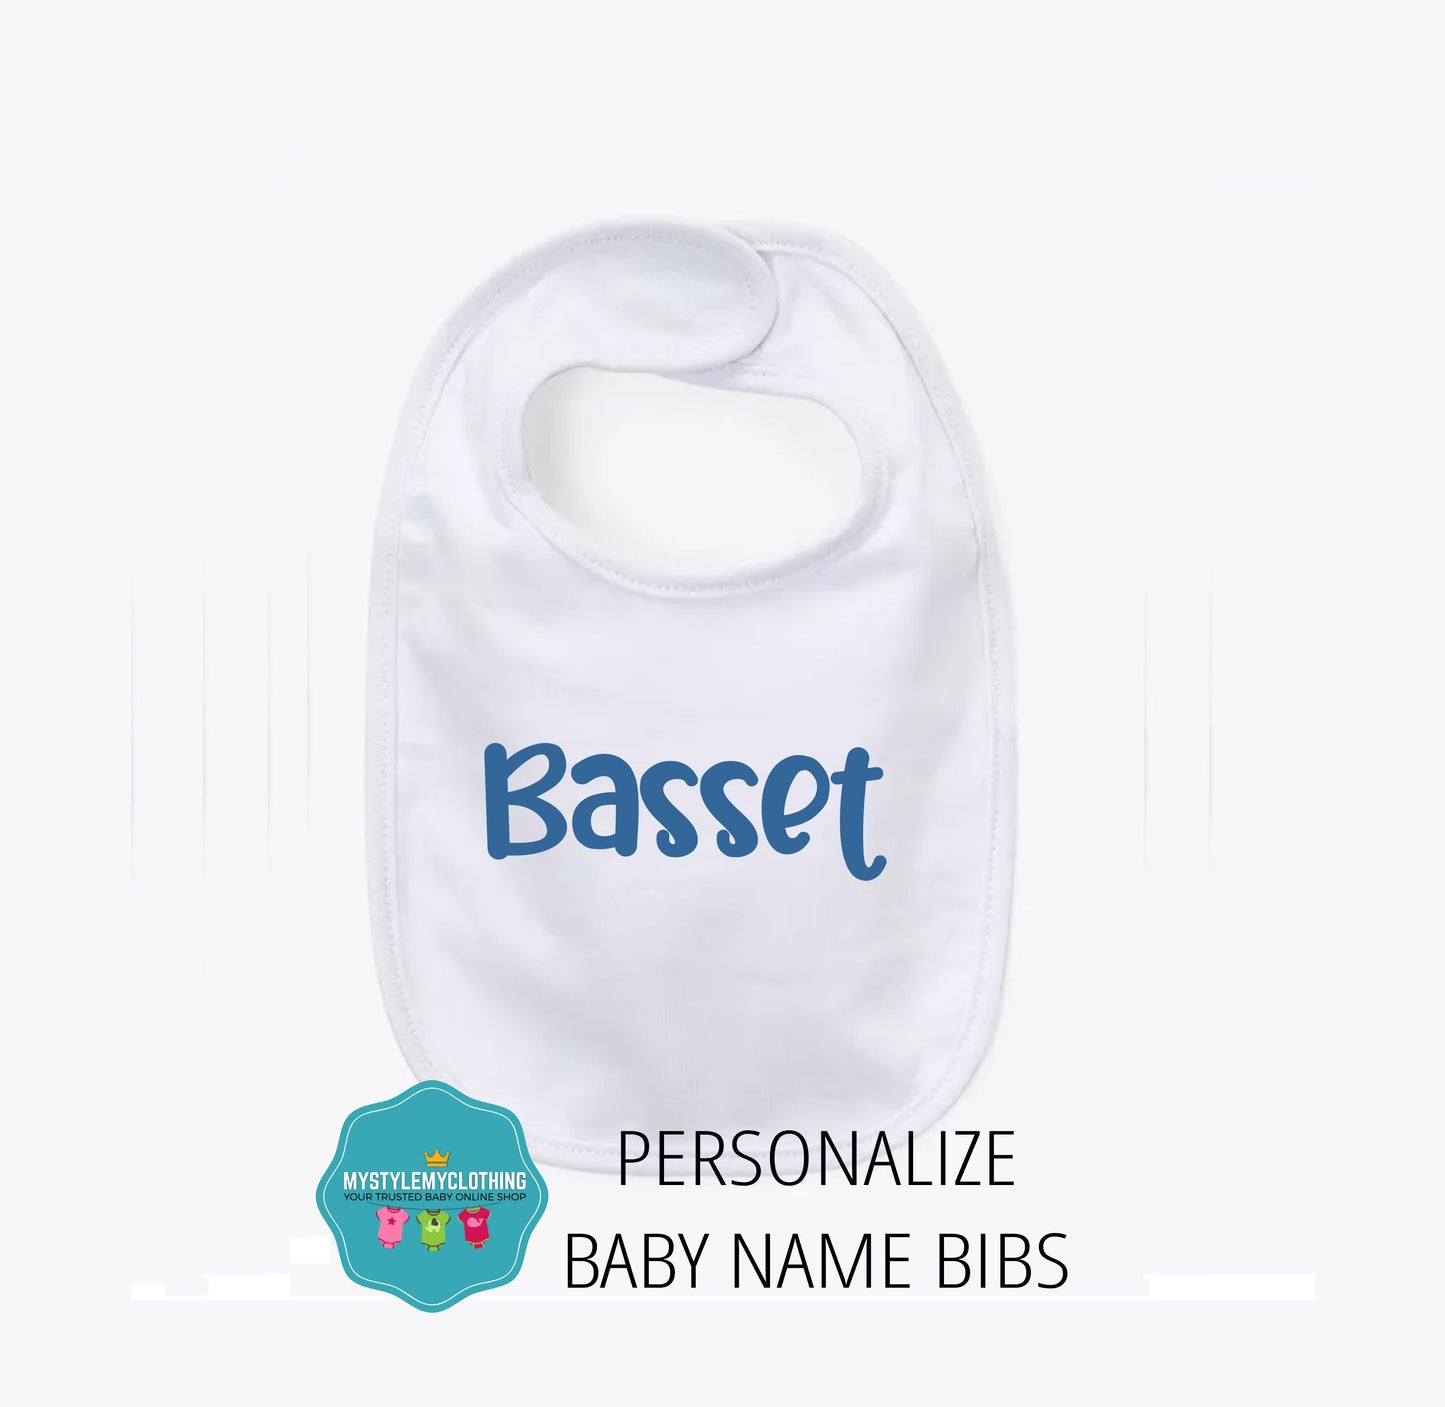 Create Your Own Baby Name Bibs - MYSTYLEMYCLOTHING